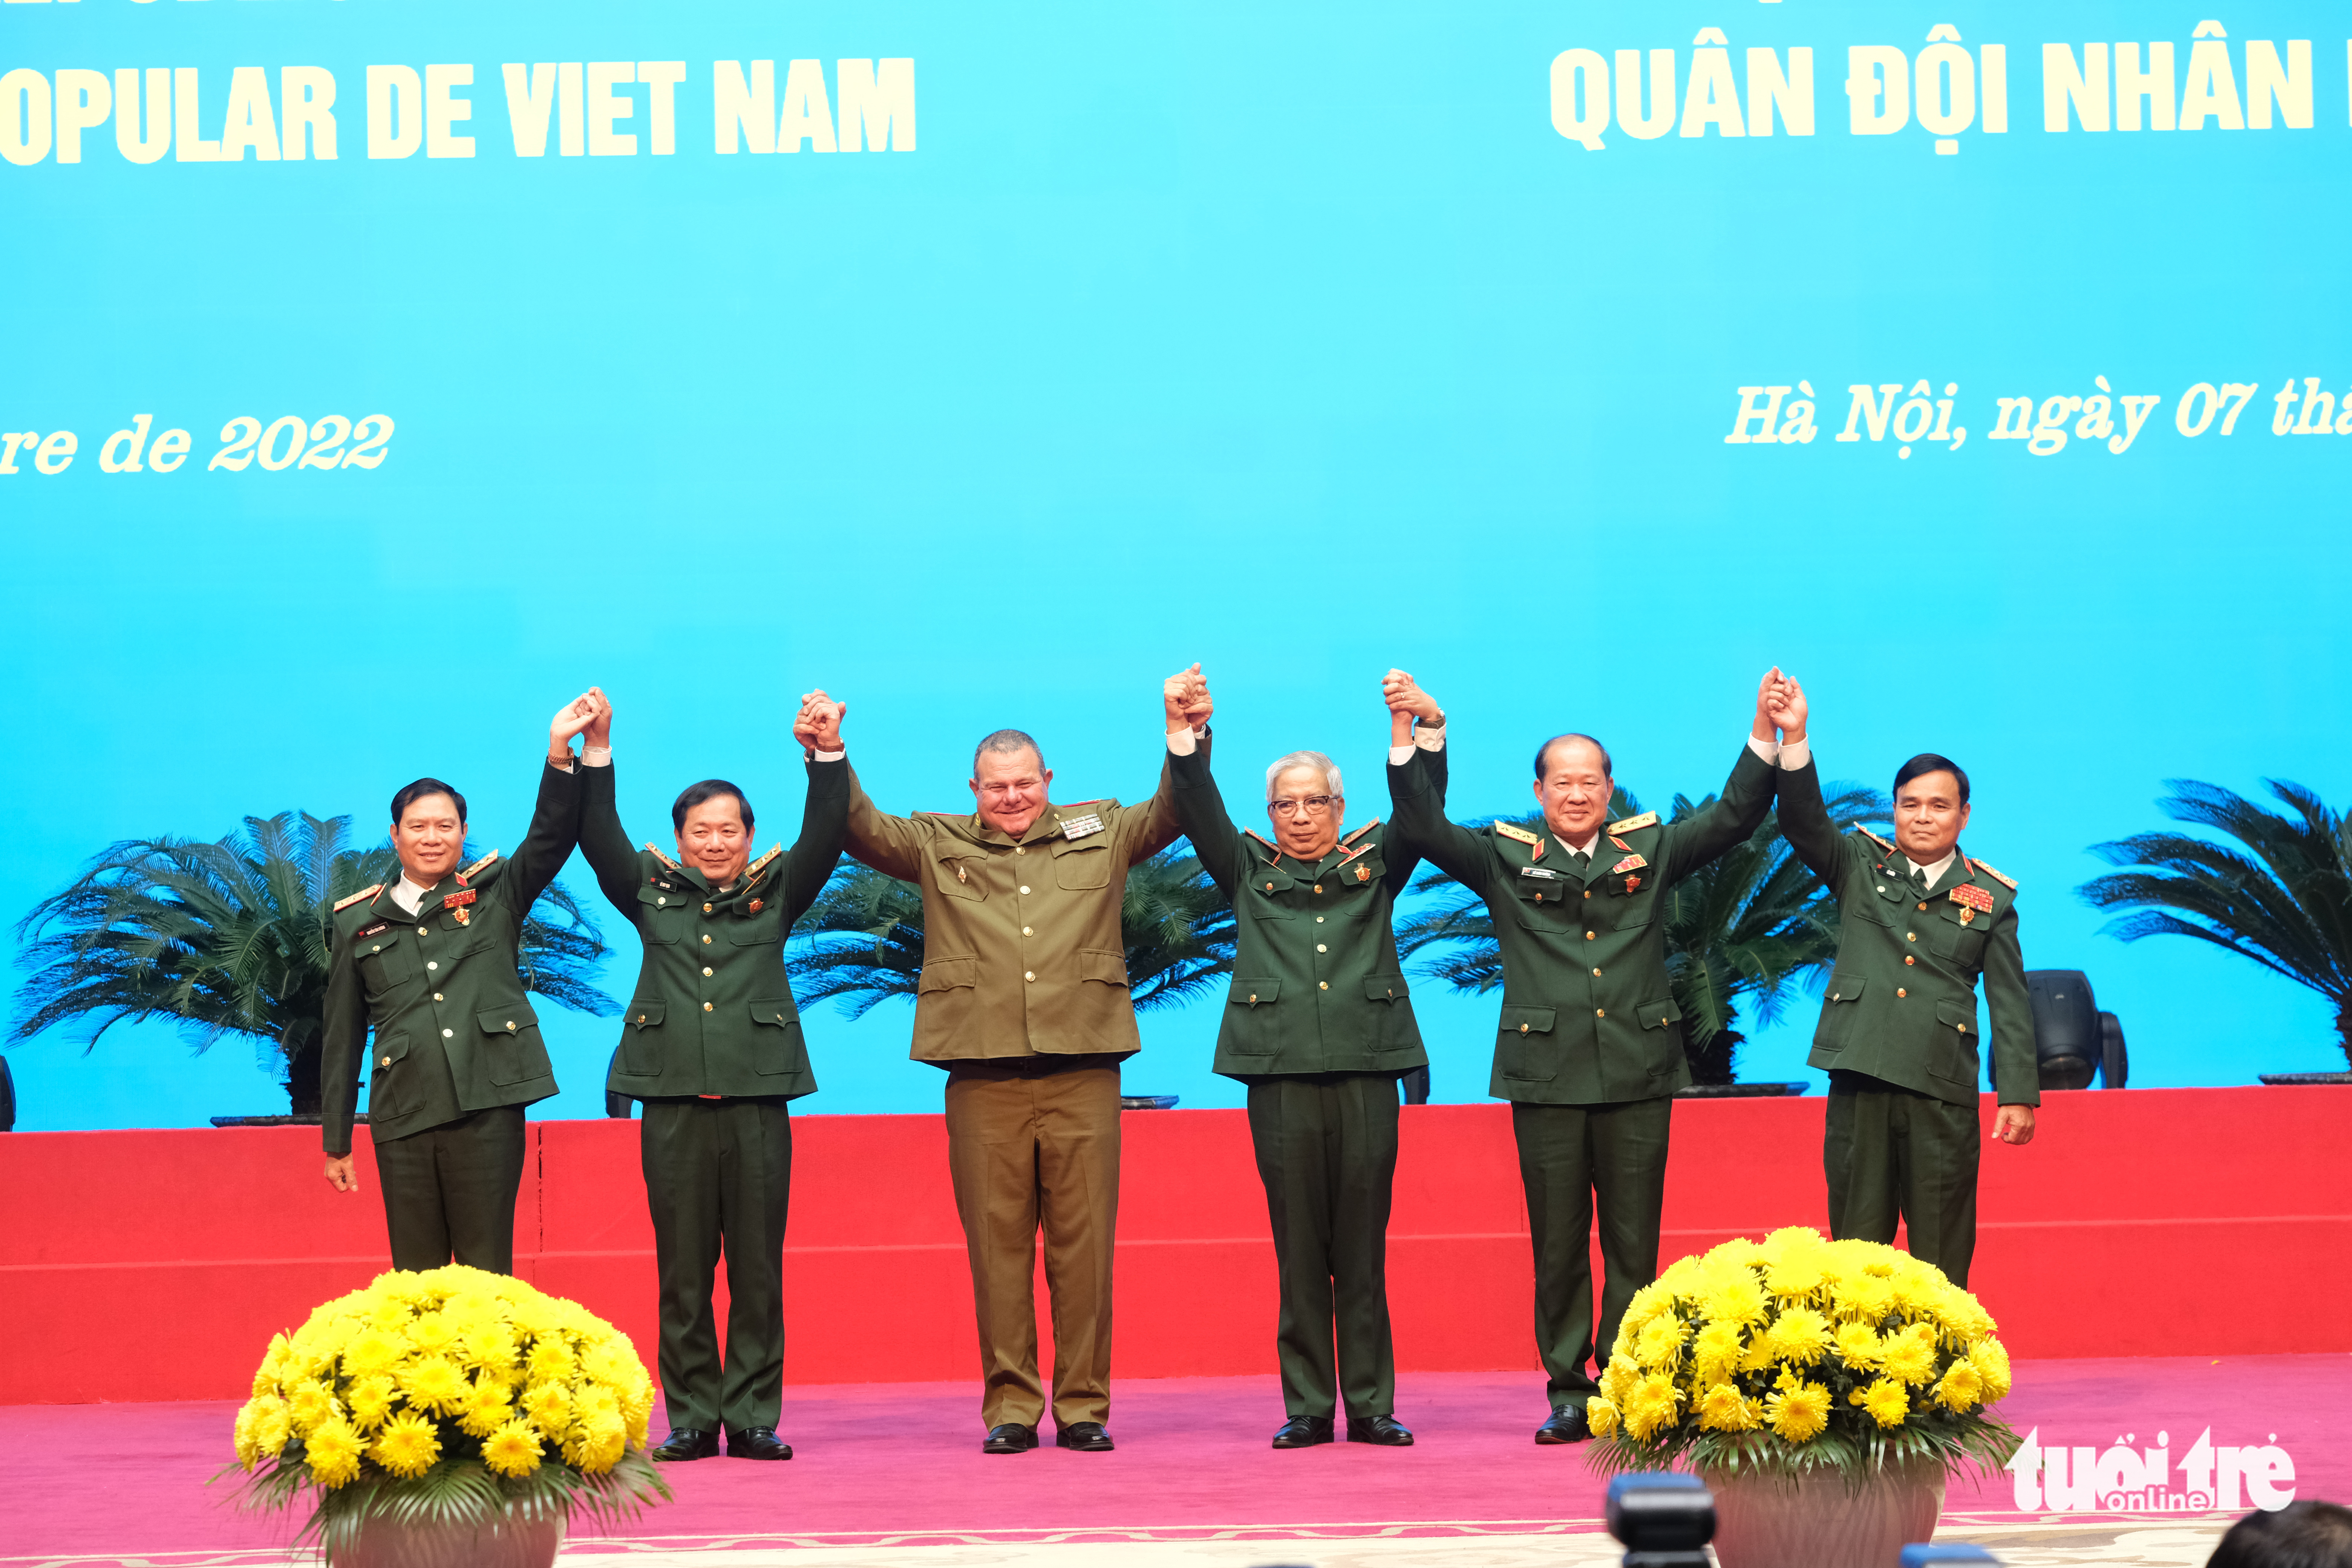 Vietnamese military officials receive the Orders of Antonio Maceo from the State of Cuba during a ceremony in Hanoi, December 7, 2022. Photo: Phu Son / Tuoi Tre